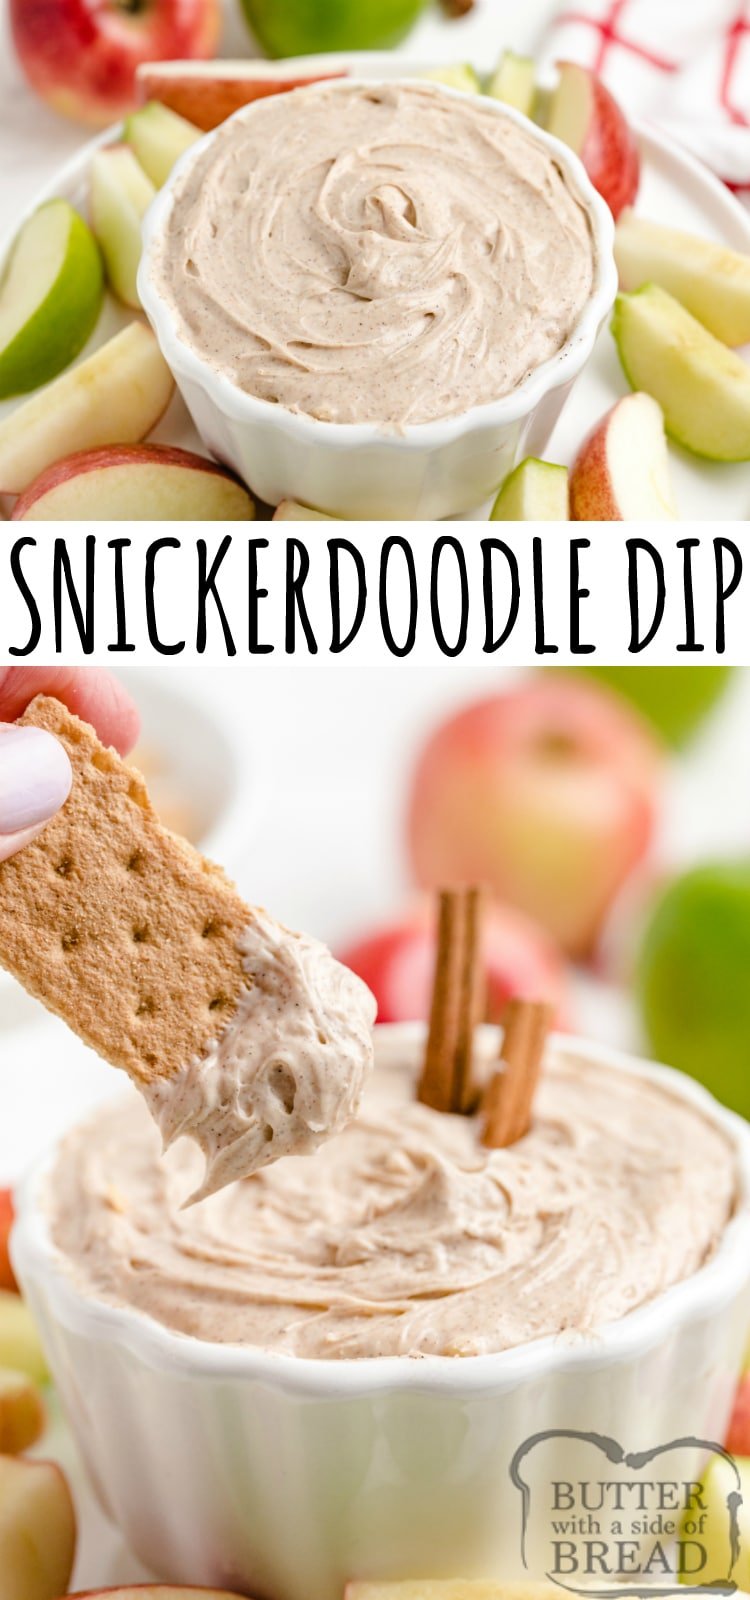 Snickerdoodle Fruit Dip is creamy, delicious and full of the cinnamon flavor that is found in snickerdoodle cookies! This cream cheese fruit dip is super easy to make and is ready to serve within minutes!